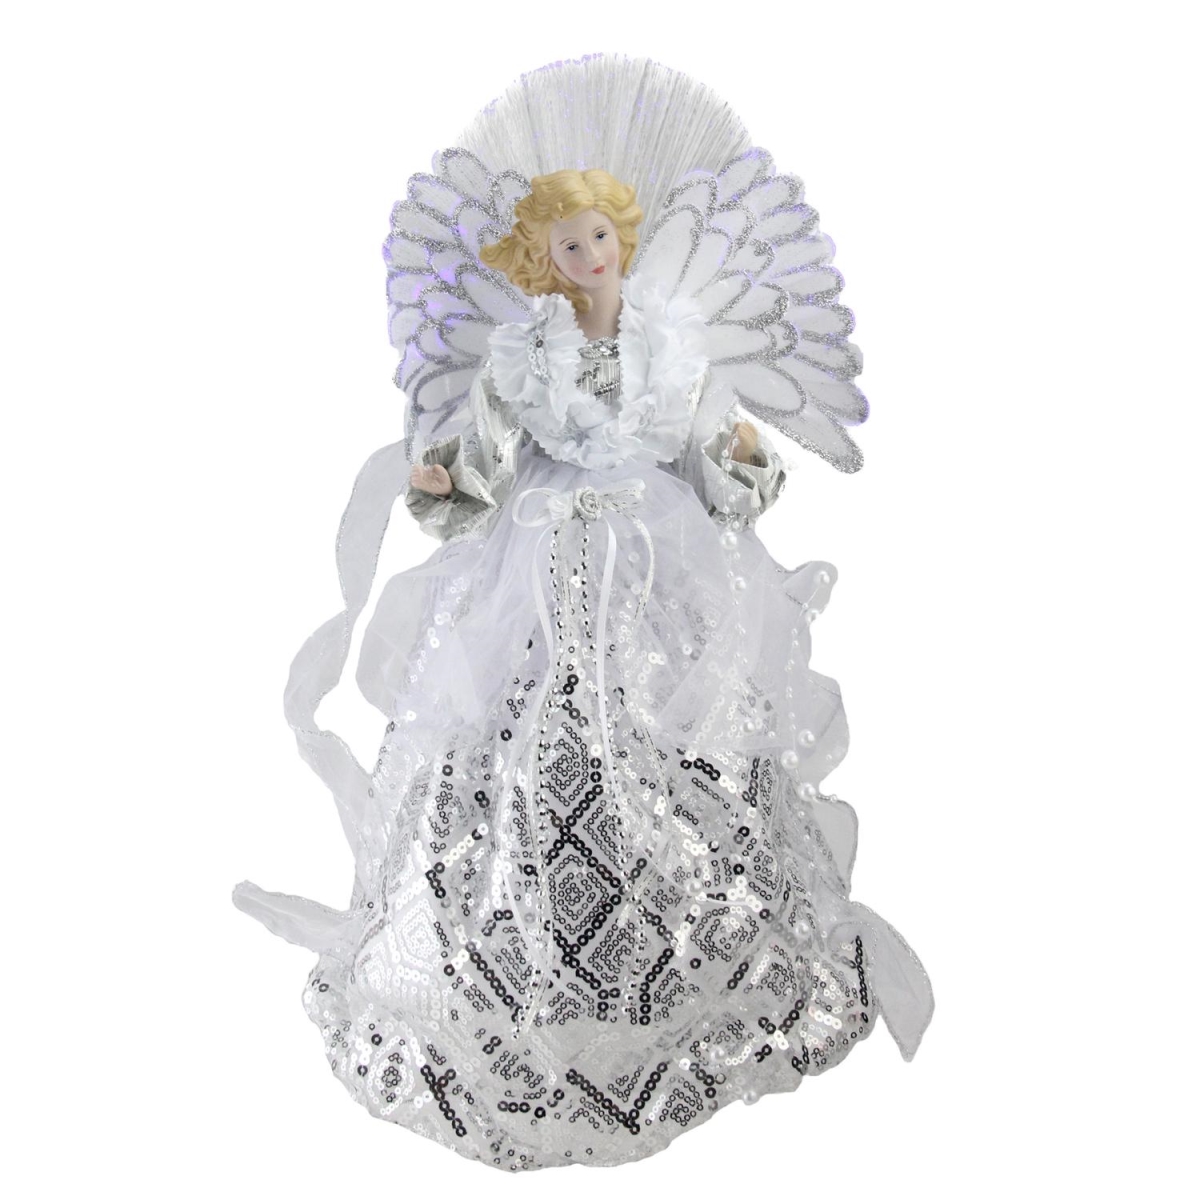 Picture of Northlight 32623517 16 in. Angel in Sequined Gown Christmas Tree Topper, White & Silver